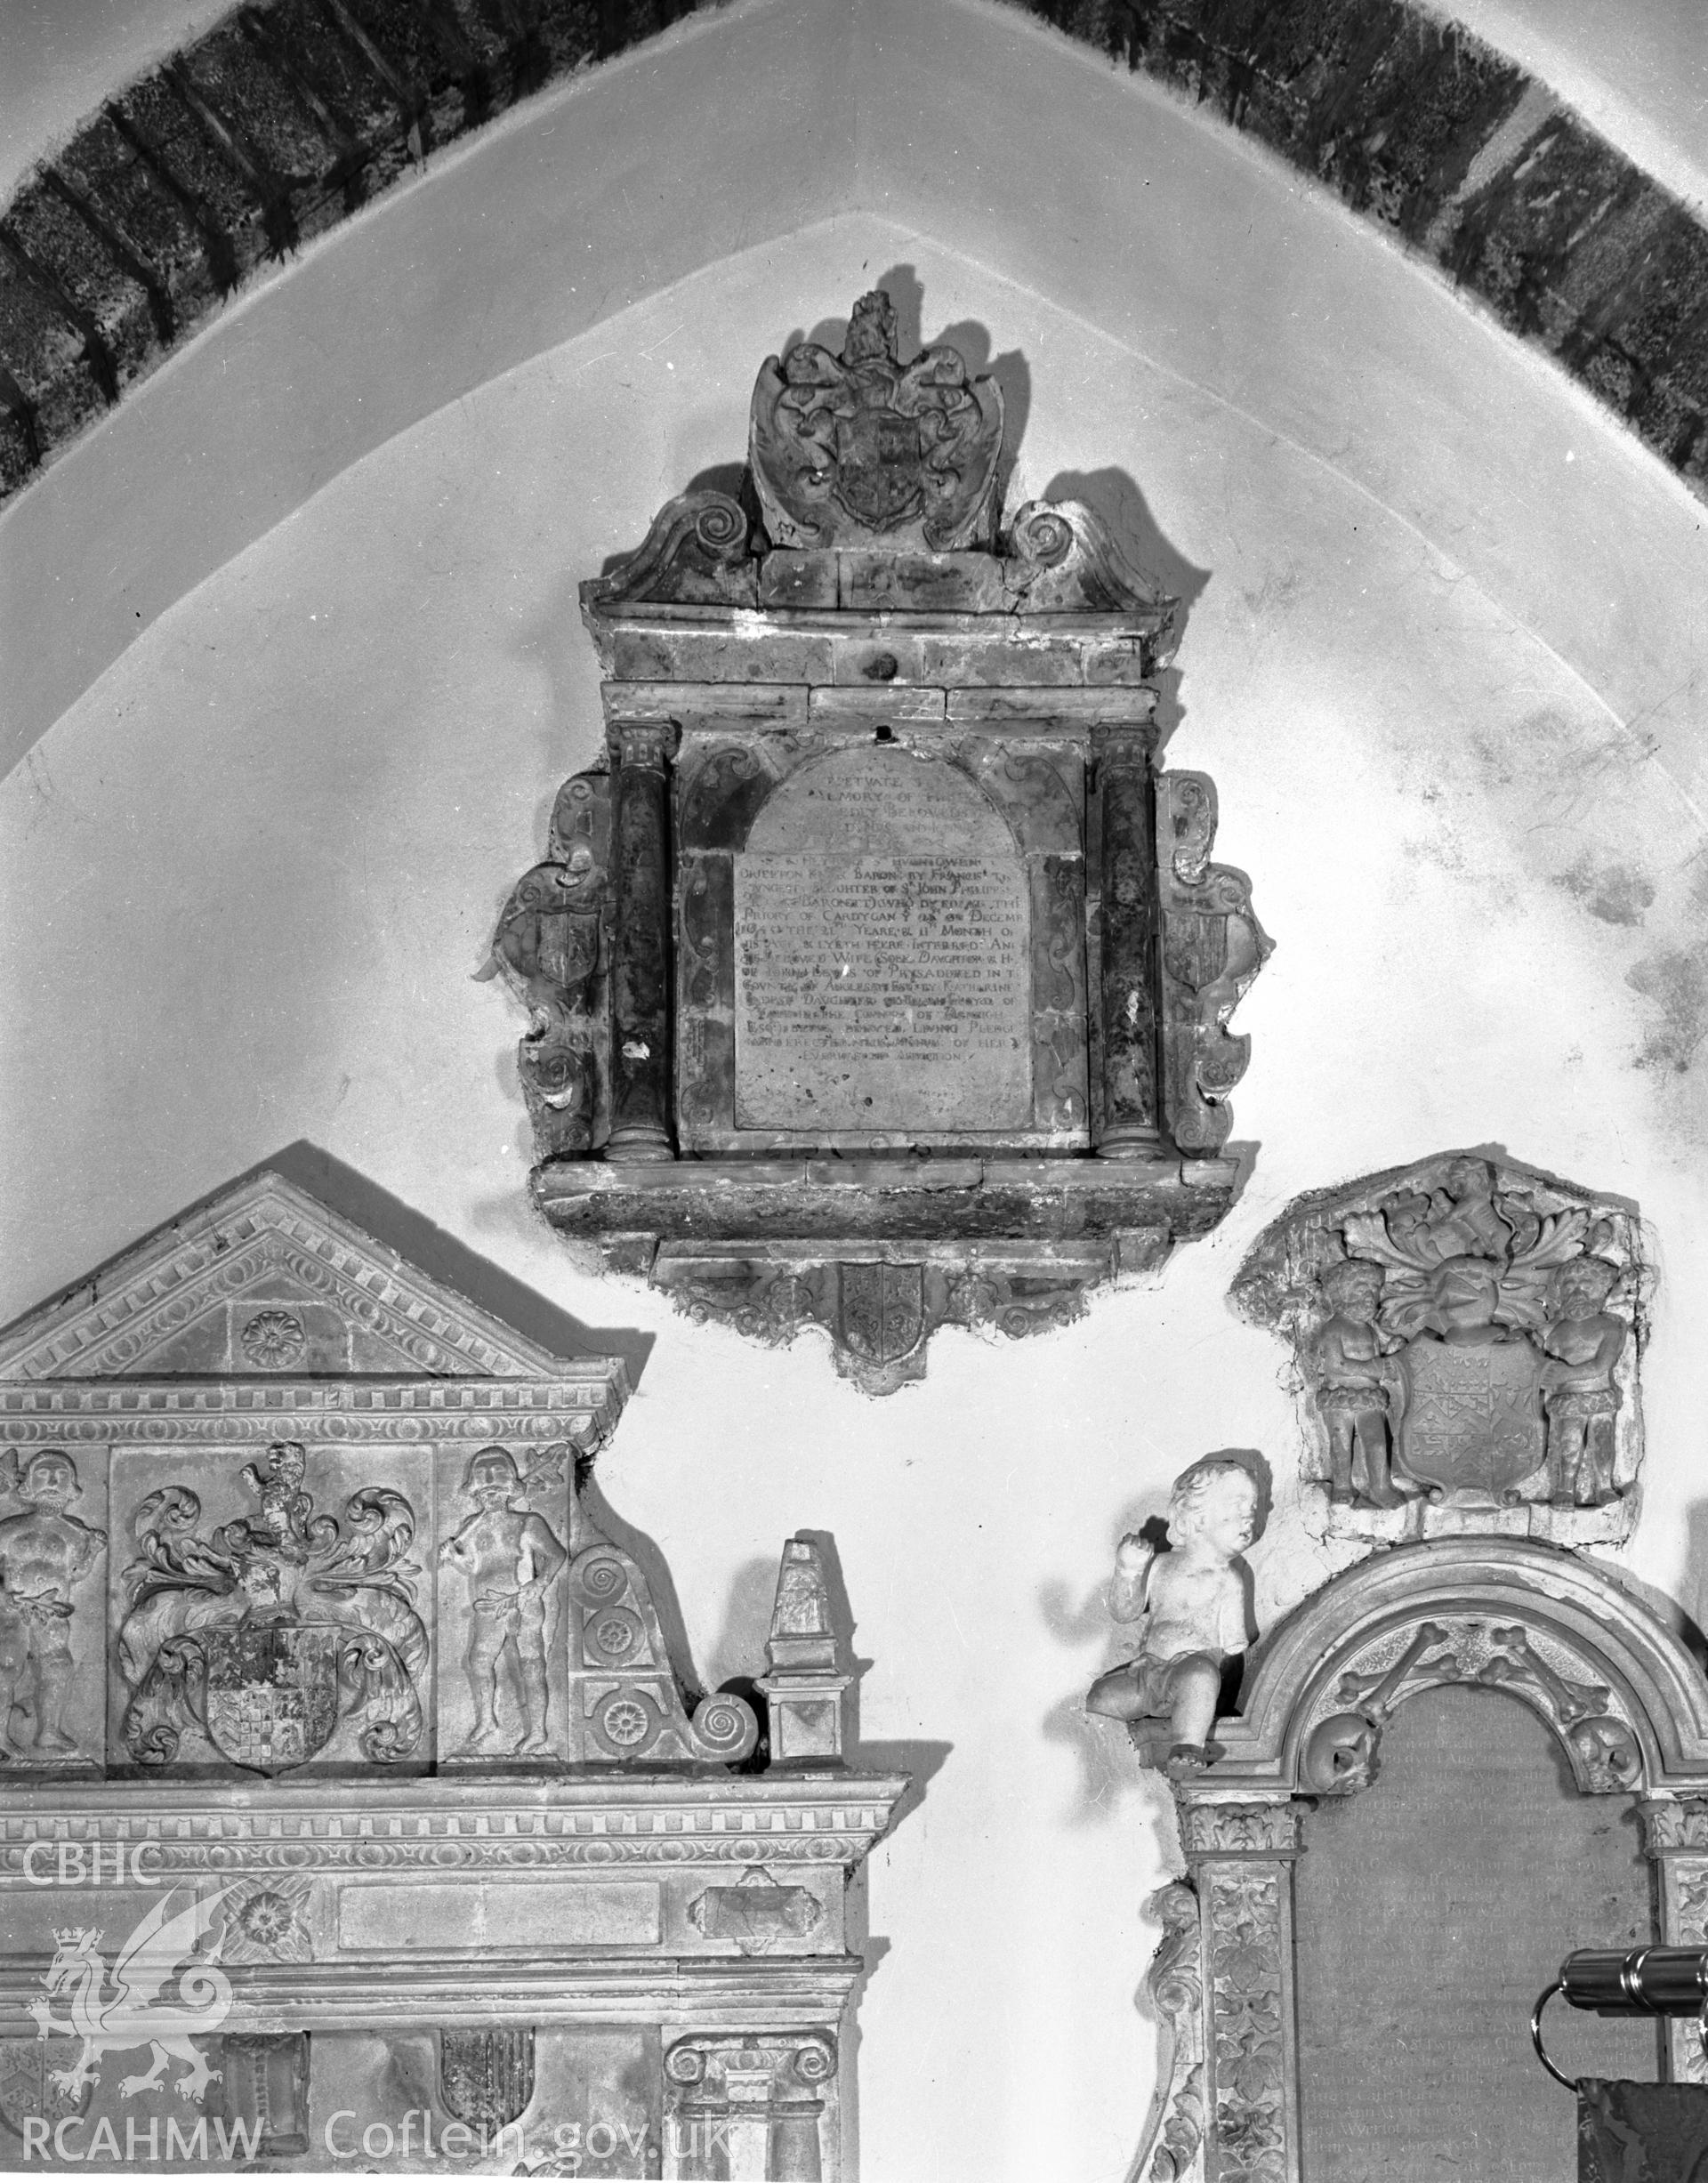 View of memorial in the north wall of the nave at Monkton Priory taken in 07.08.1941.